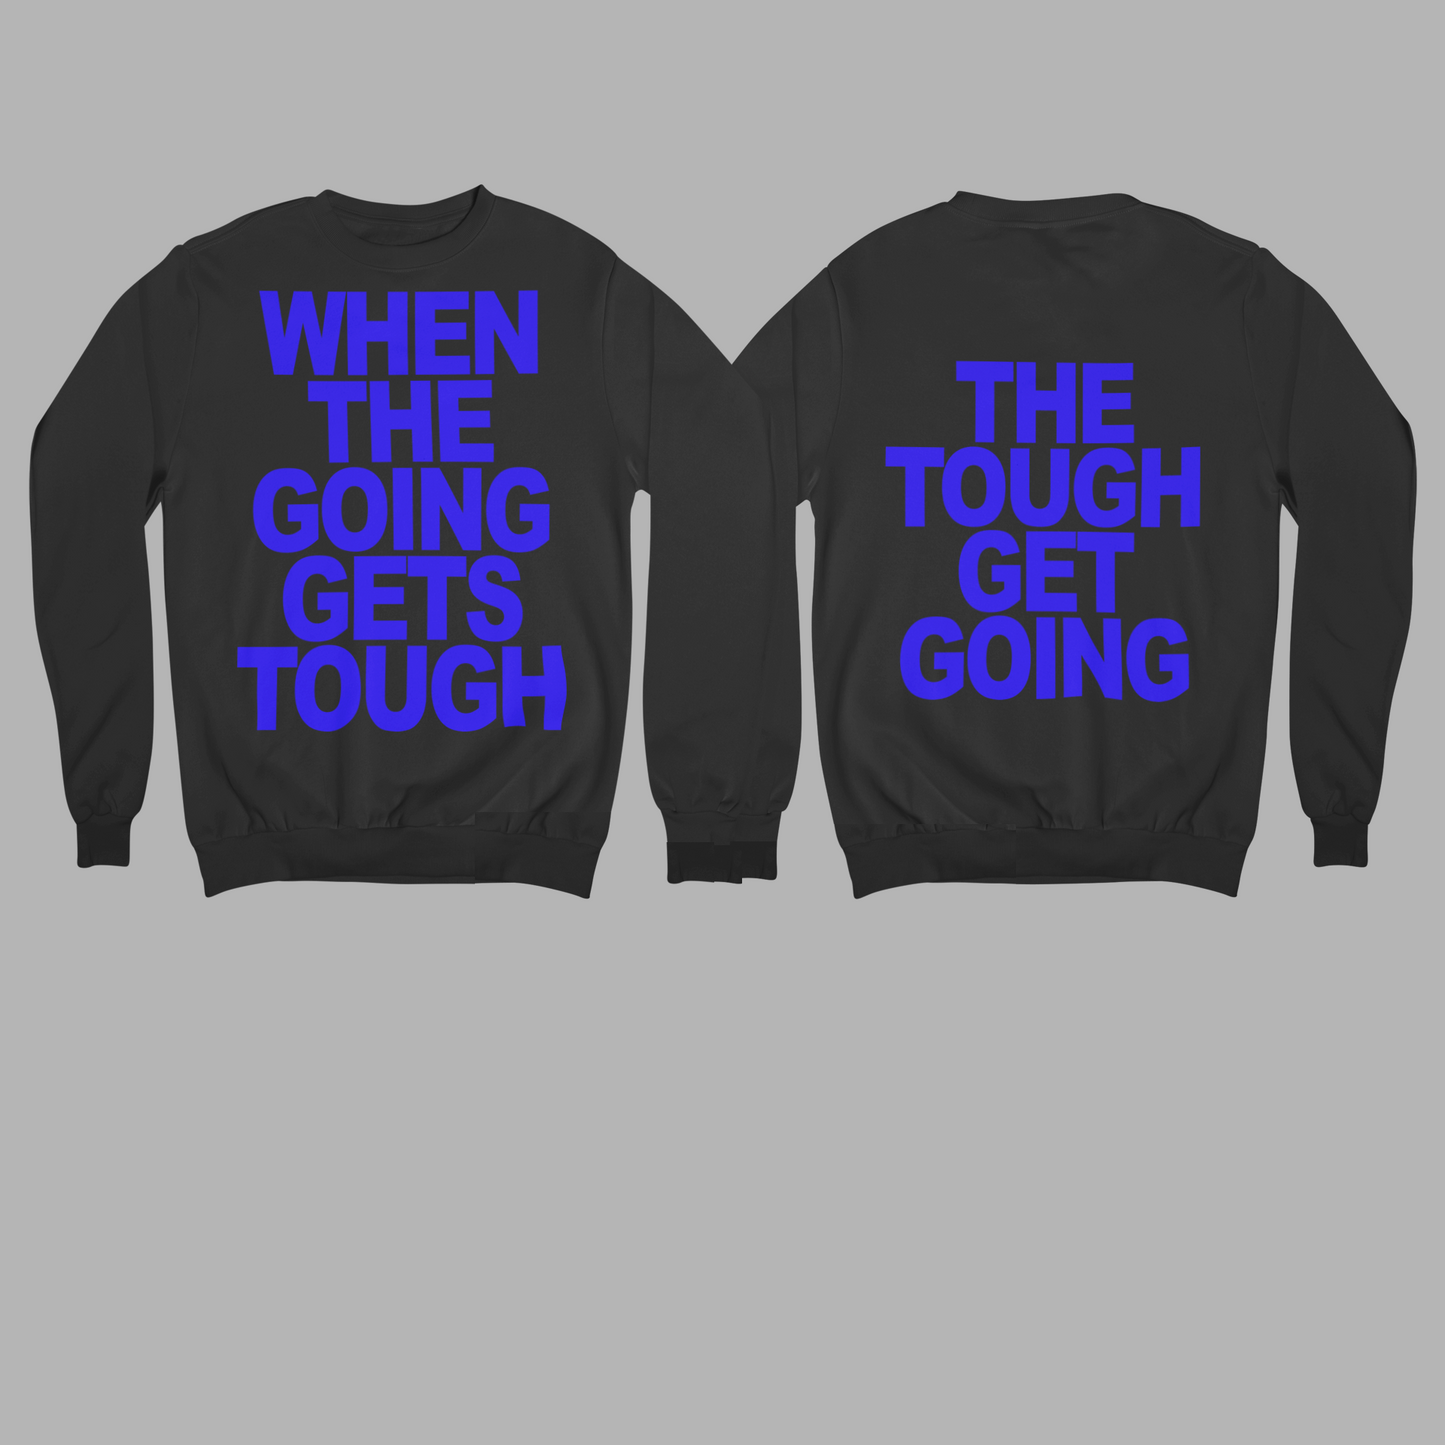 WTGGT - SWEATSHIRT FRONT AND BACK PRINT